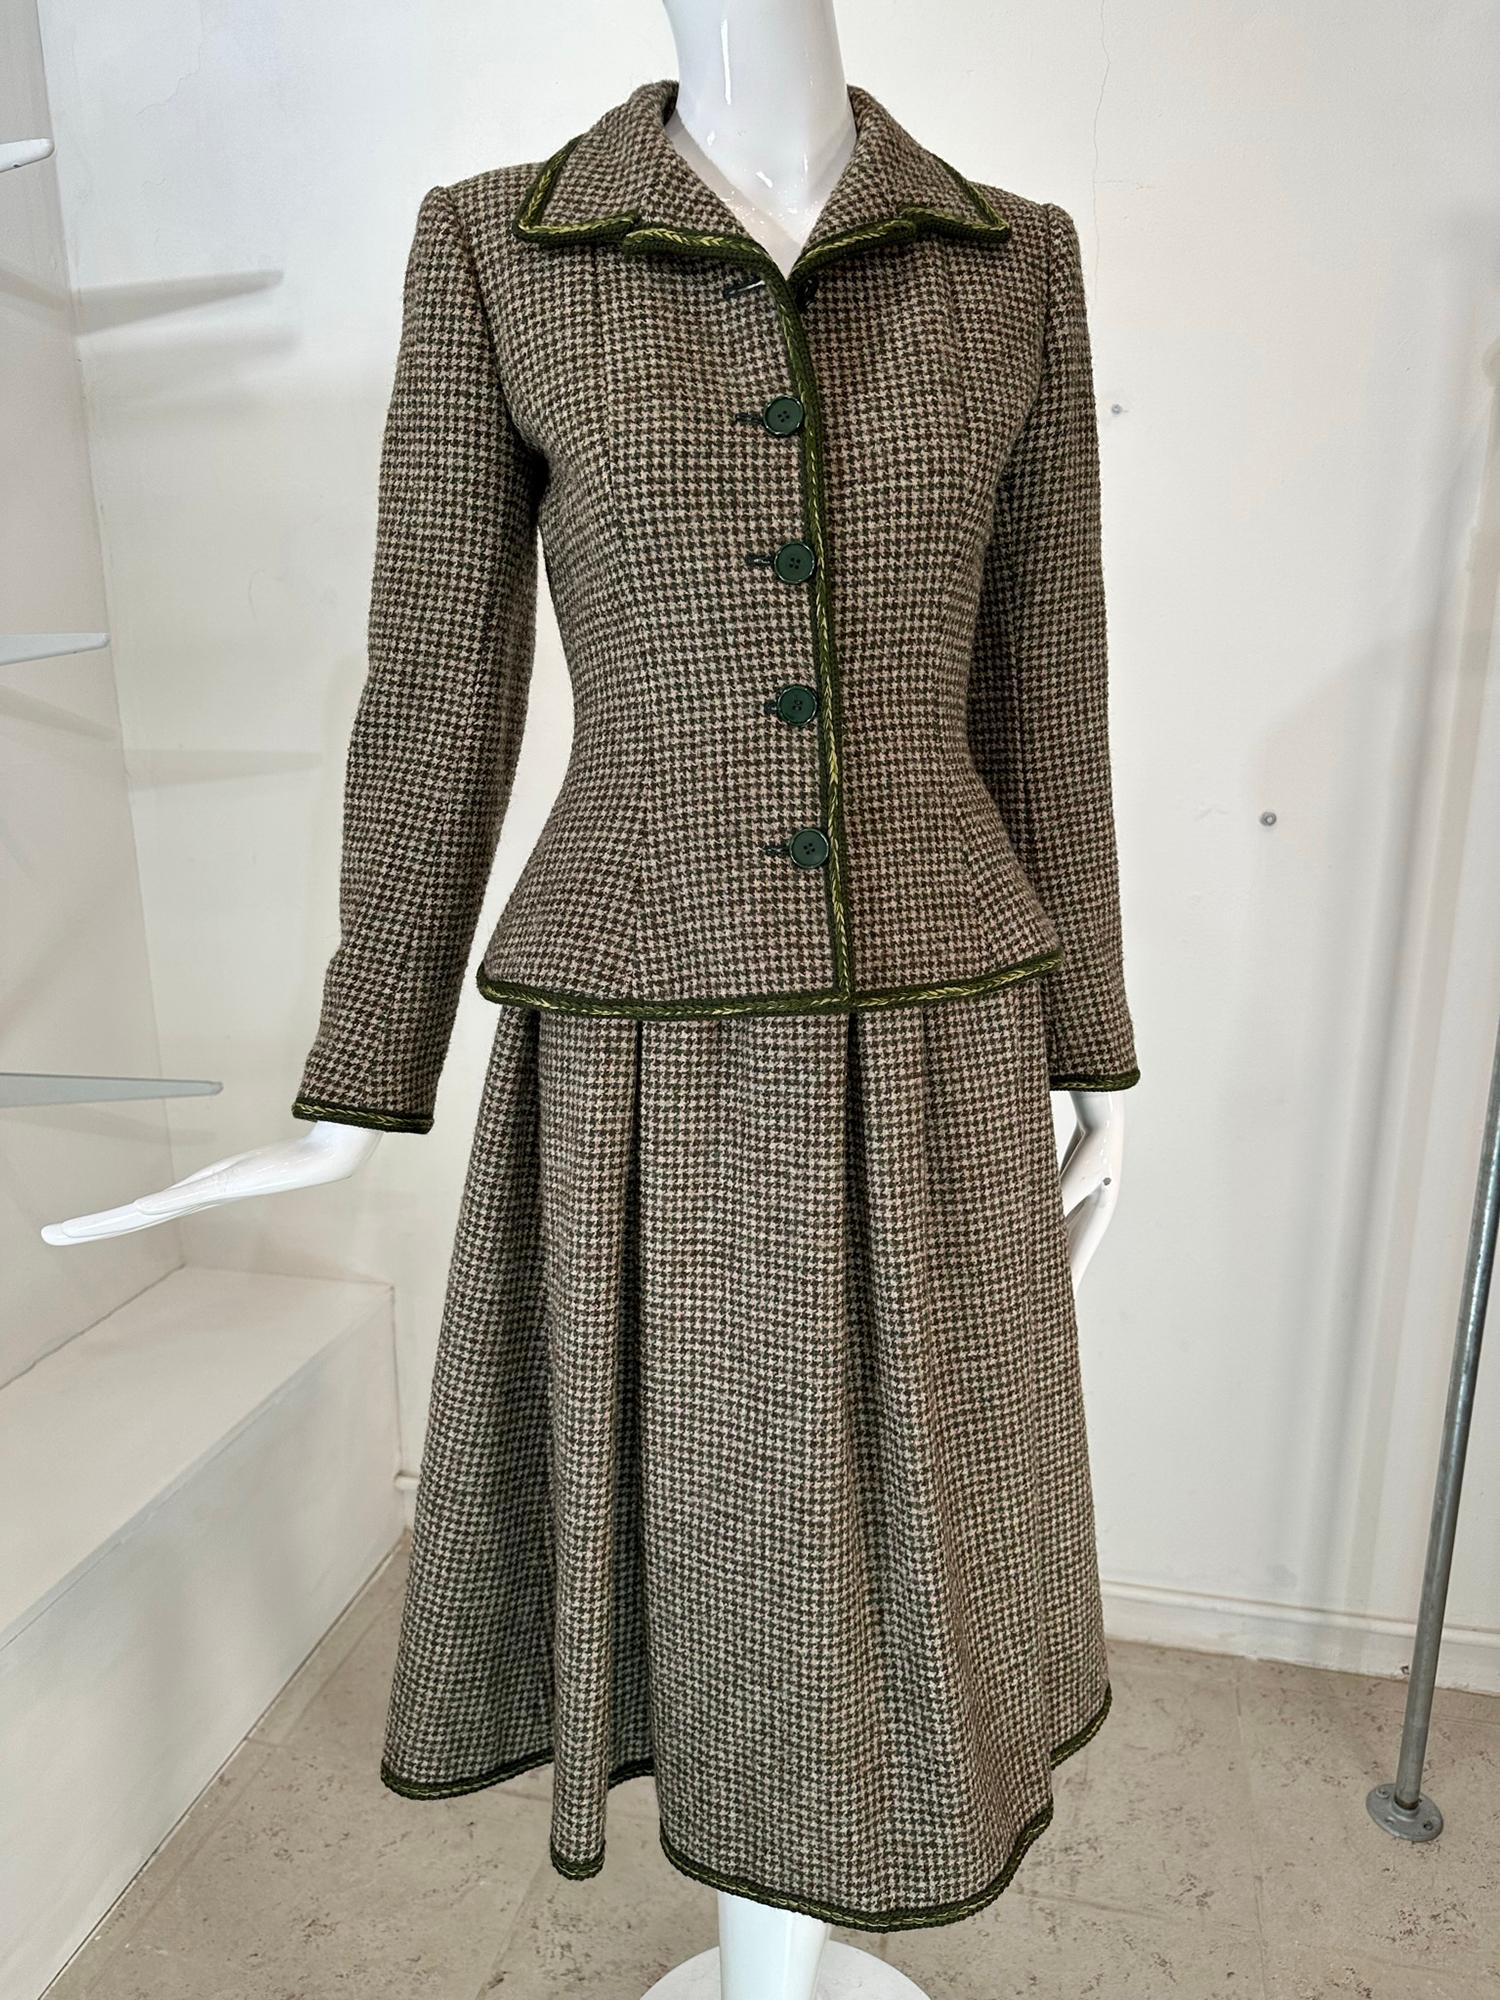 Valentino Boutique Early 1960s Green & Cream Wool Tweed Skirt Suit In Good Condition For Sale In West Palm Beach, FL